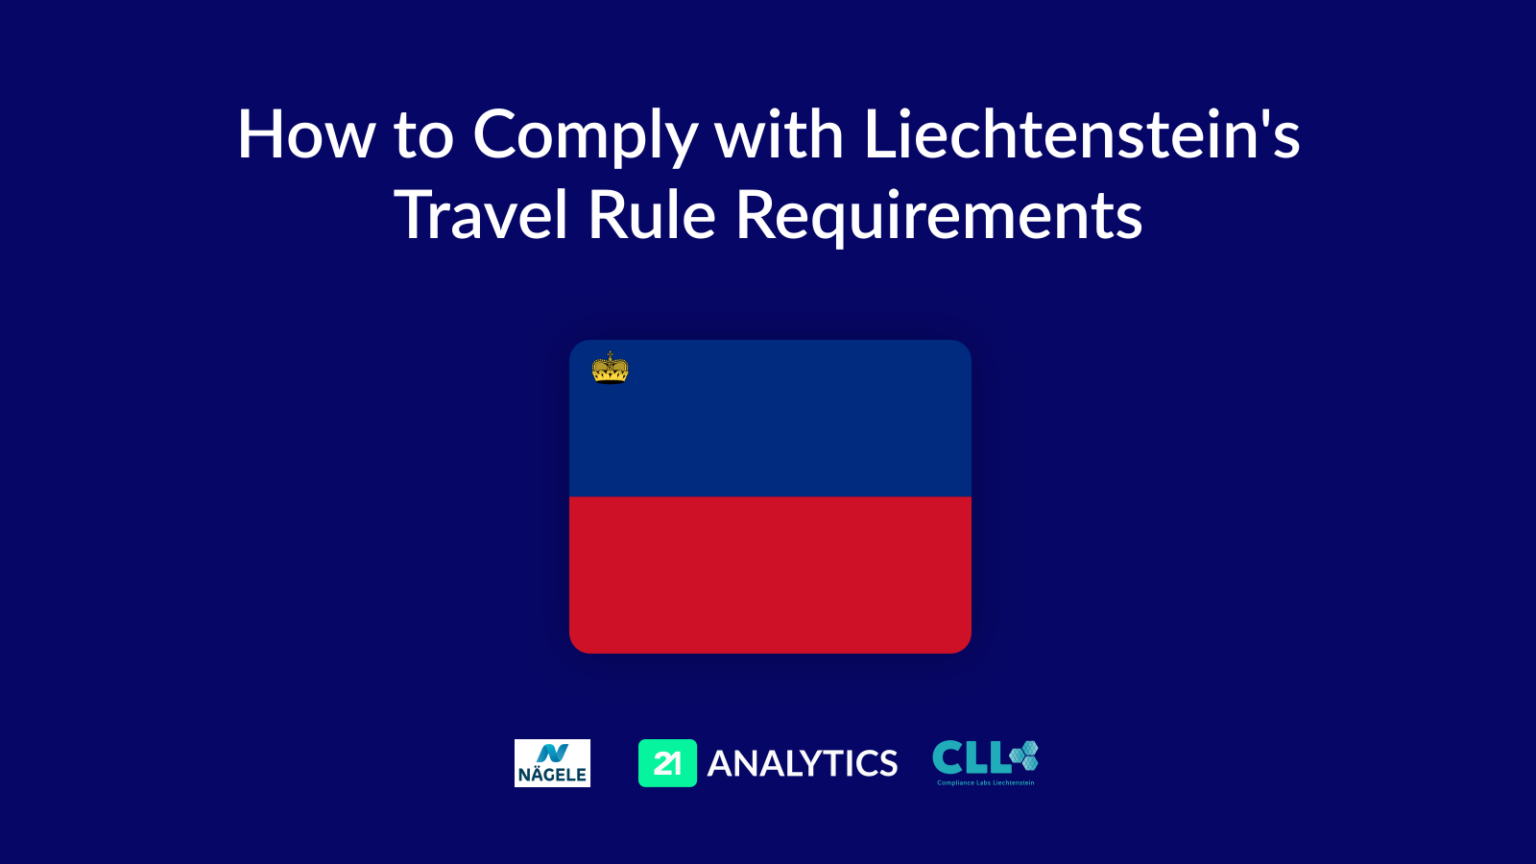 How to comply with Liechtenstein's travel rule requirements